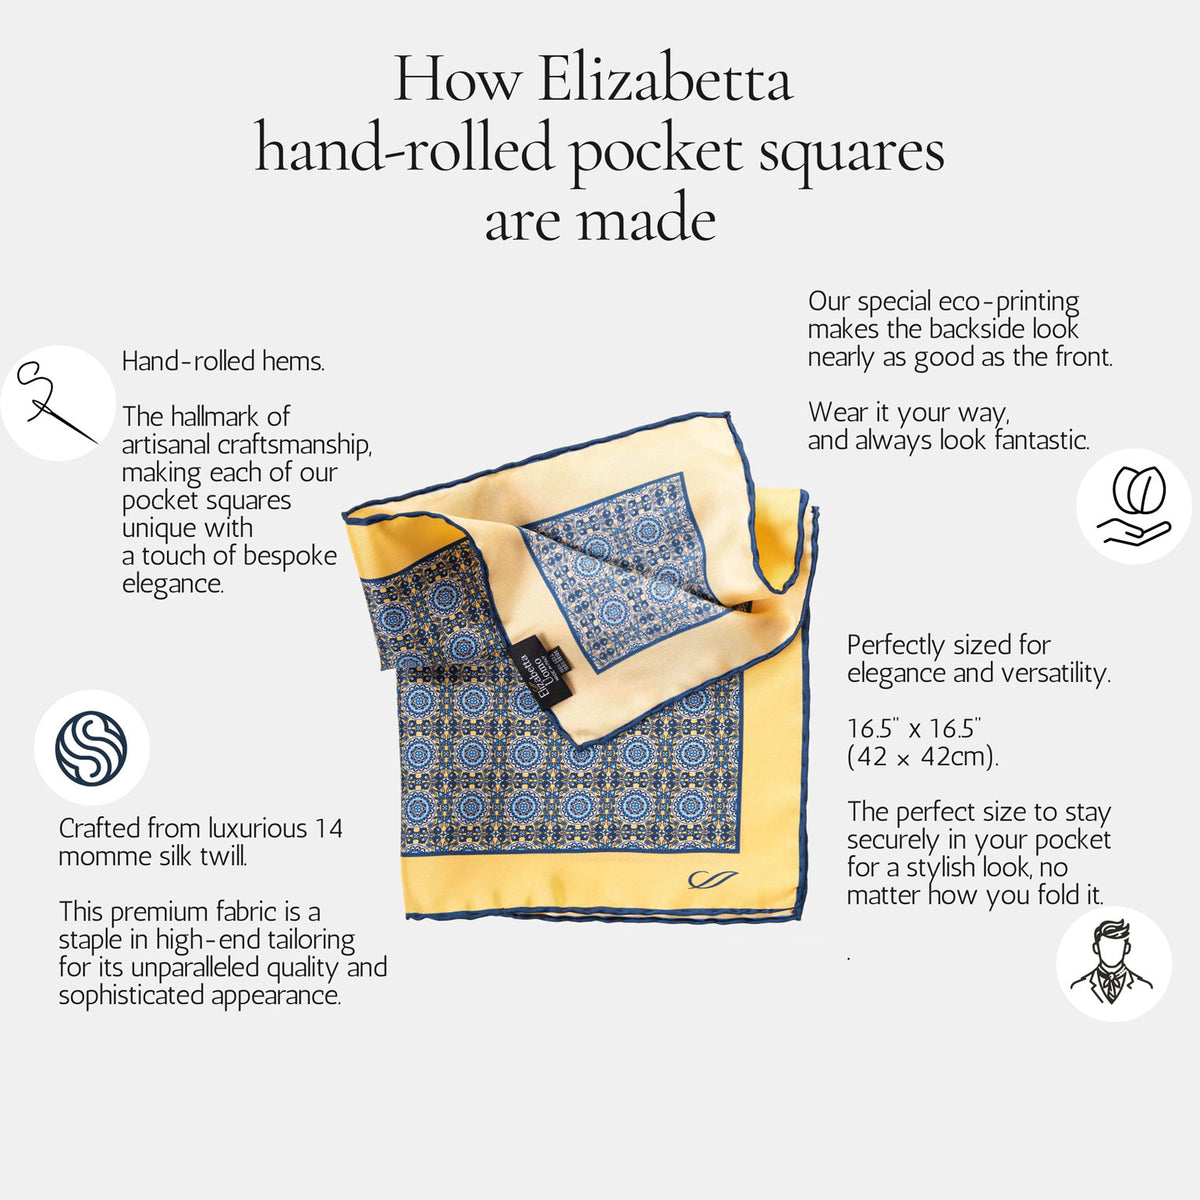 How Elizabetta hand-rolled pocket square is made